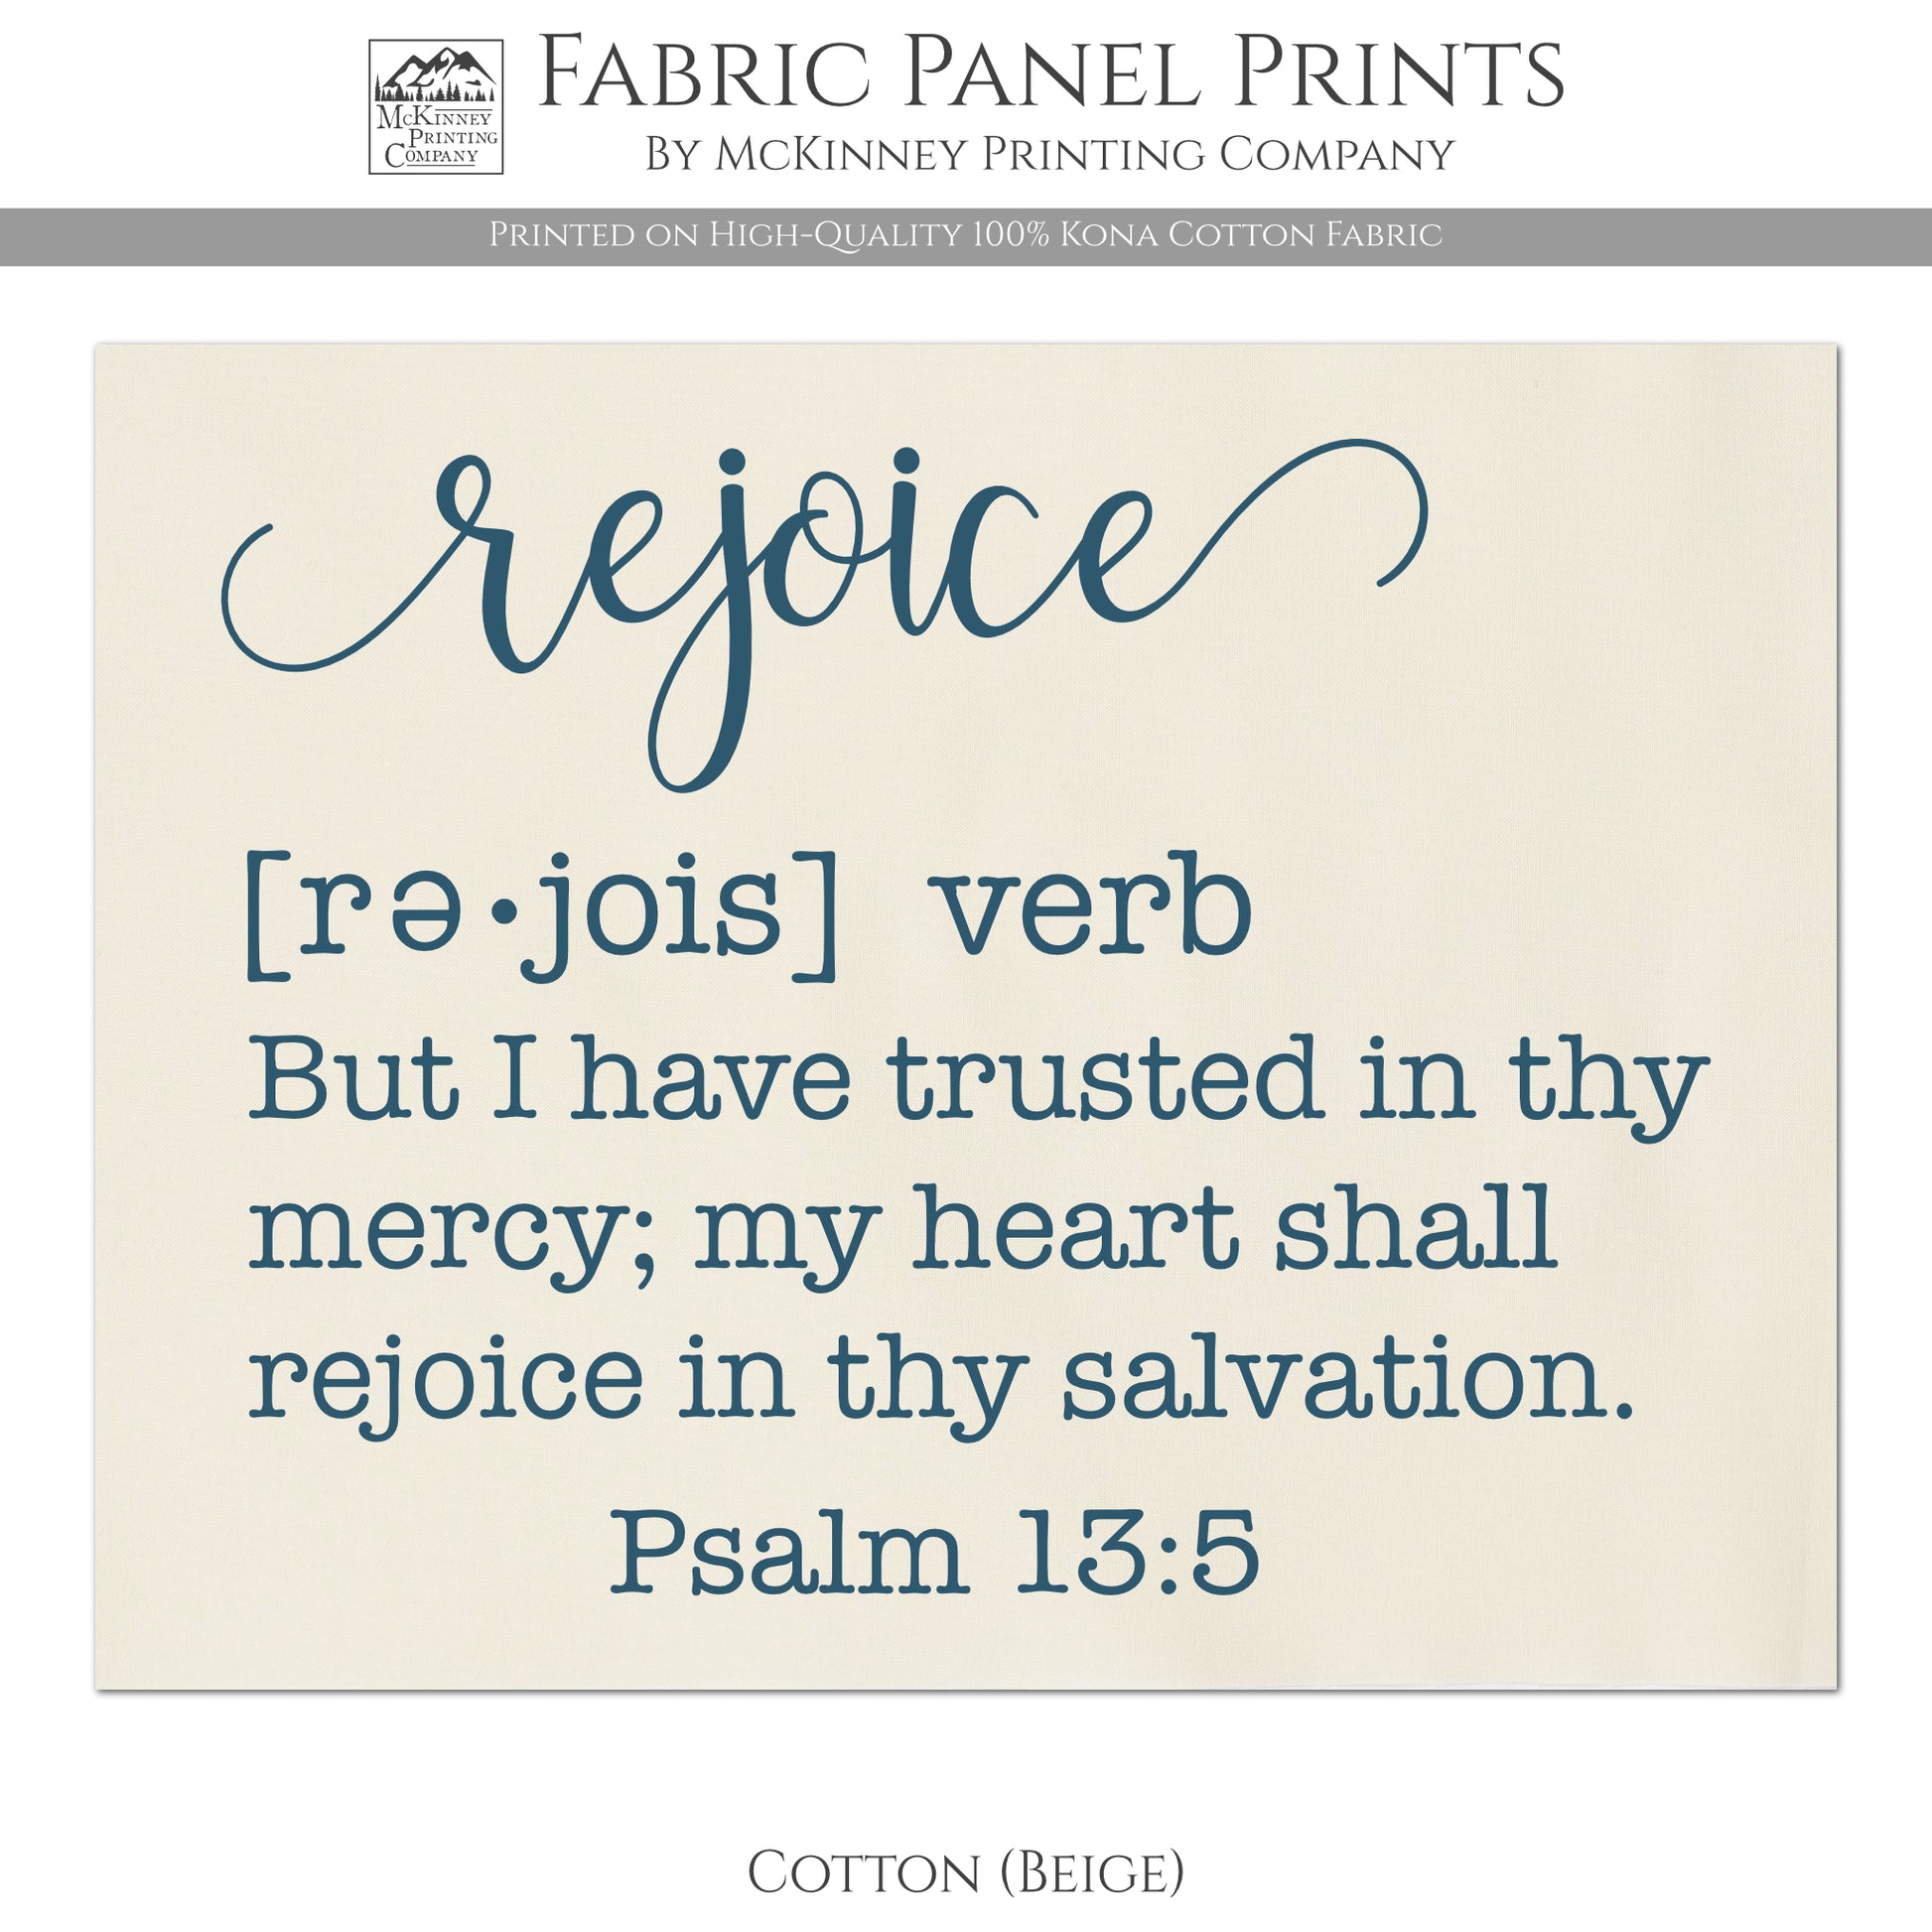 Rejoice - Christian Fabric - But I have trusted in thy mercy; my heart shall rejoice in thy salvation - Psalm 13:5  - Cotton